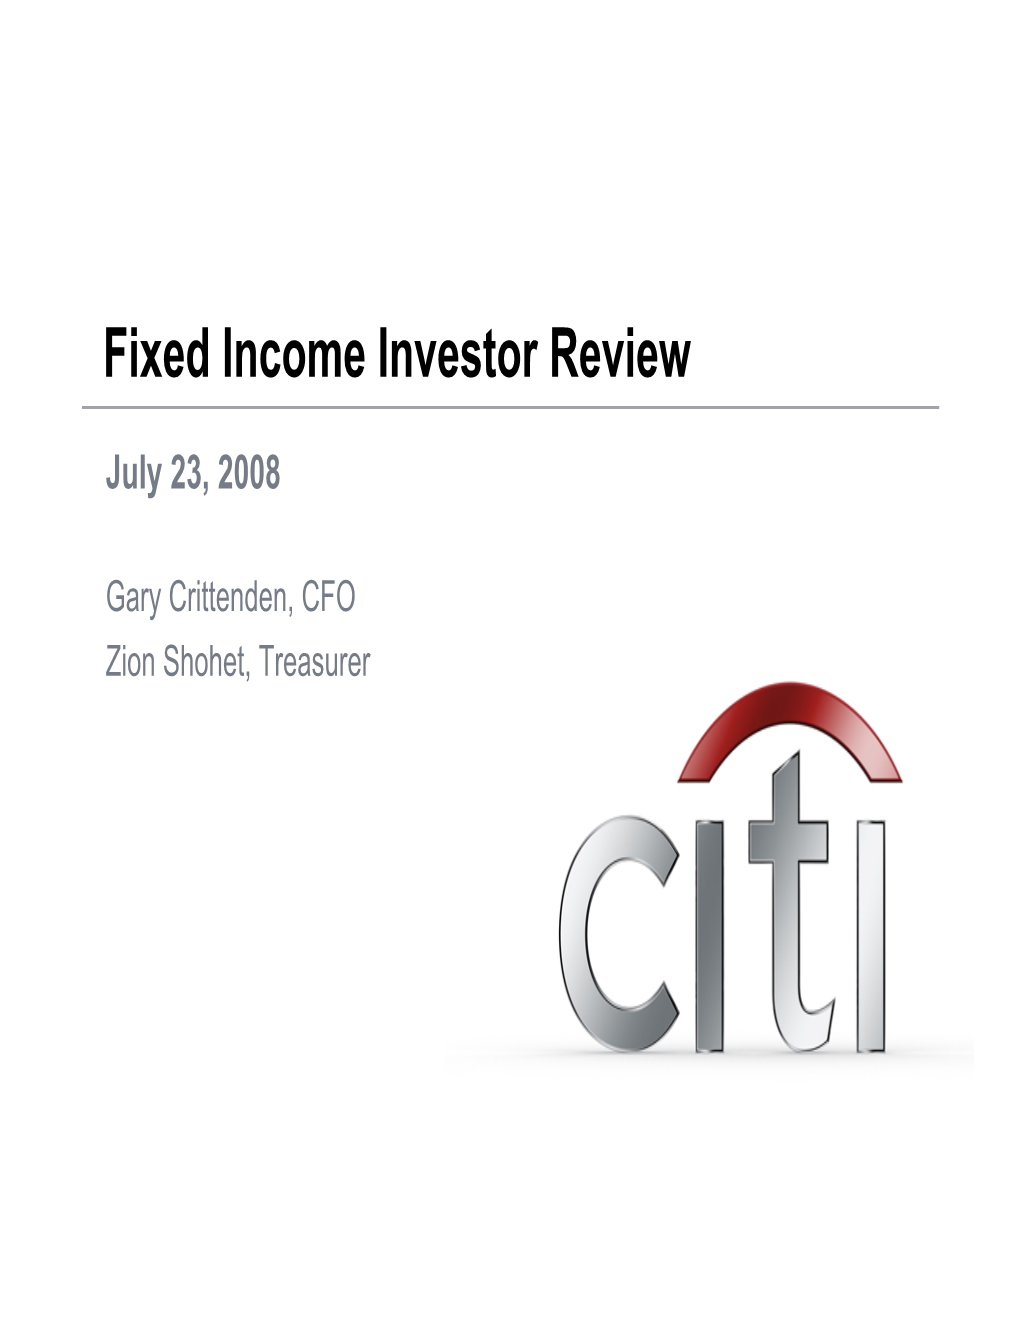 Fixed Income Investor Review